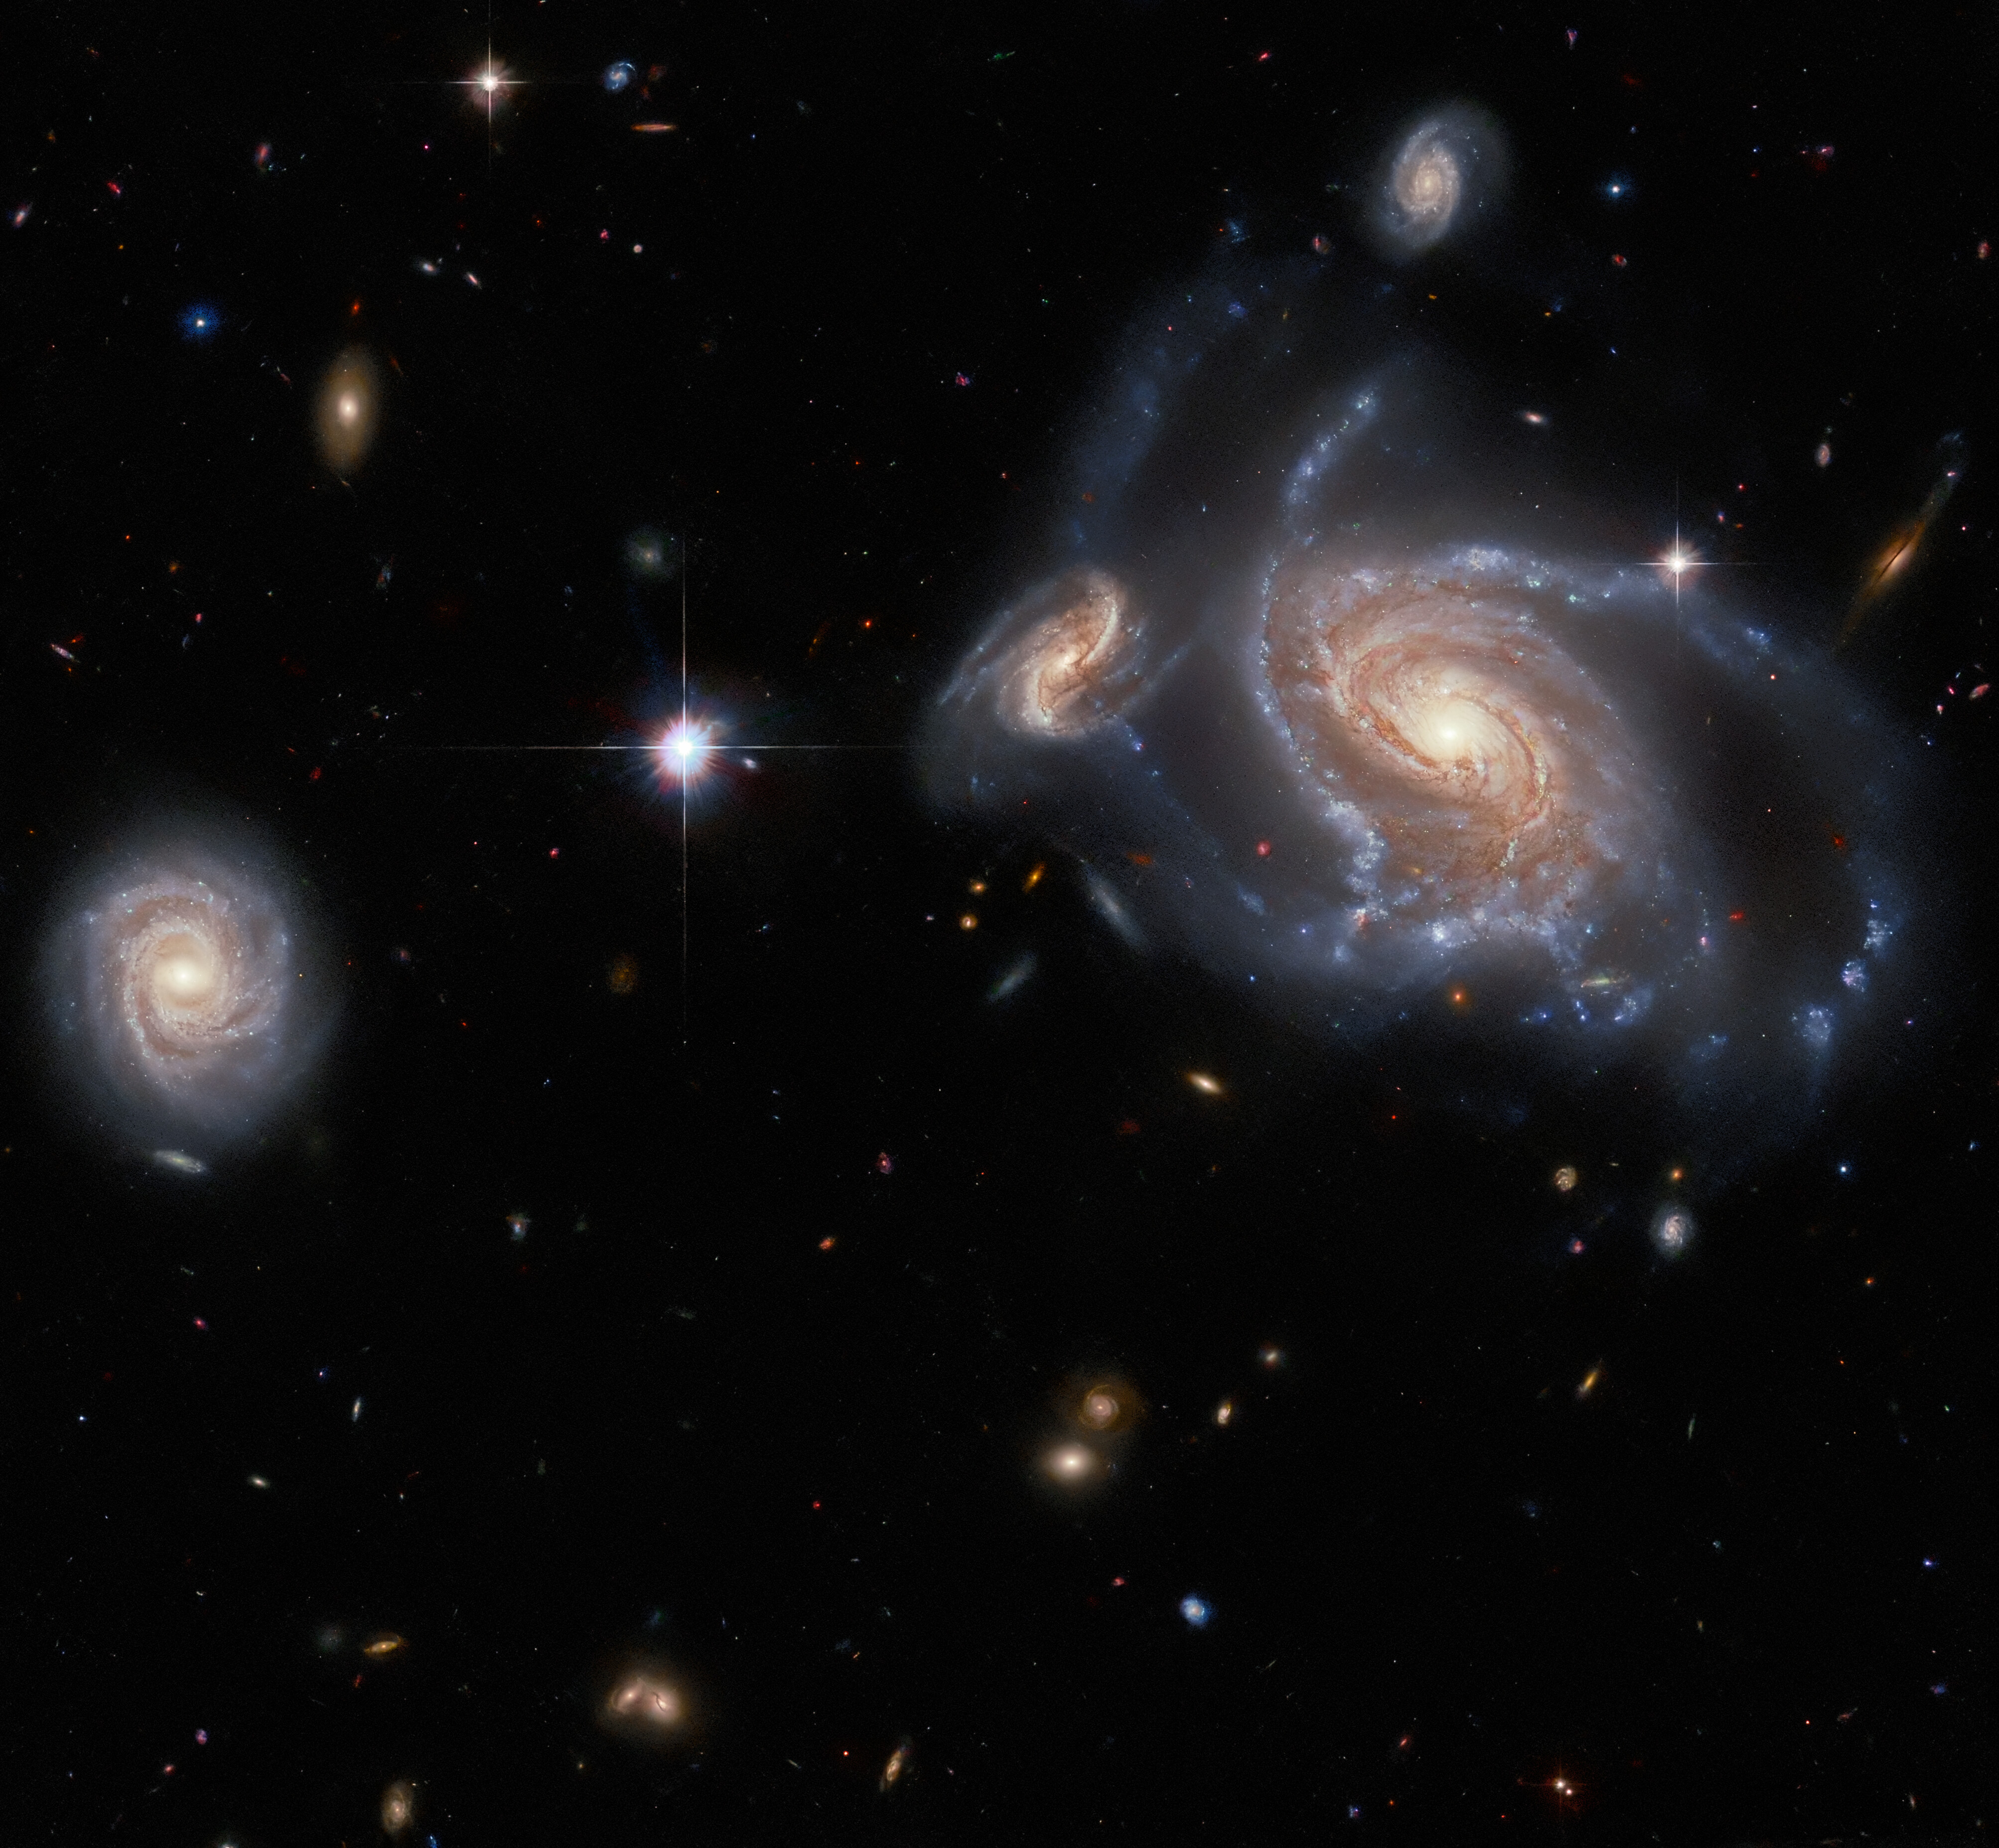 A collection of galaxies. On the right side a large spiral galaxy with swirling, twisted arms is flanked by a smaller, but still detailed, spiral behind its arm on the left, and a smaller spiral above it. On the left side is a fourth, round spiral galaxy seen face-on. Between them lies a single bright star. Several stars and distant galaxies dot the background.